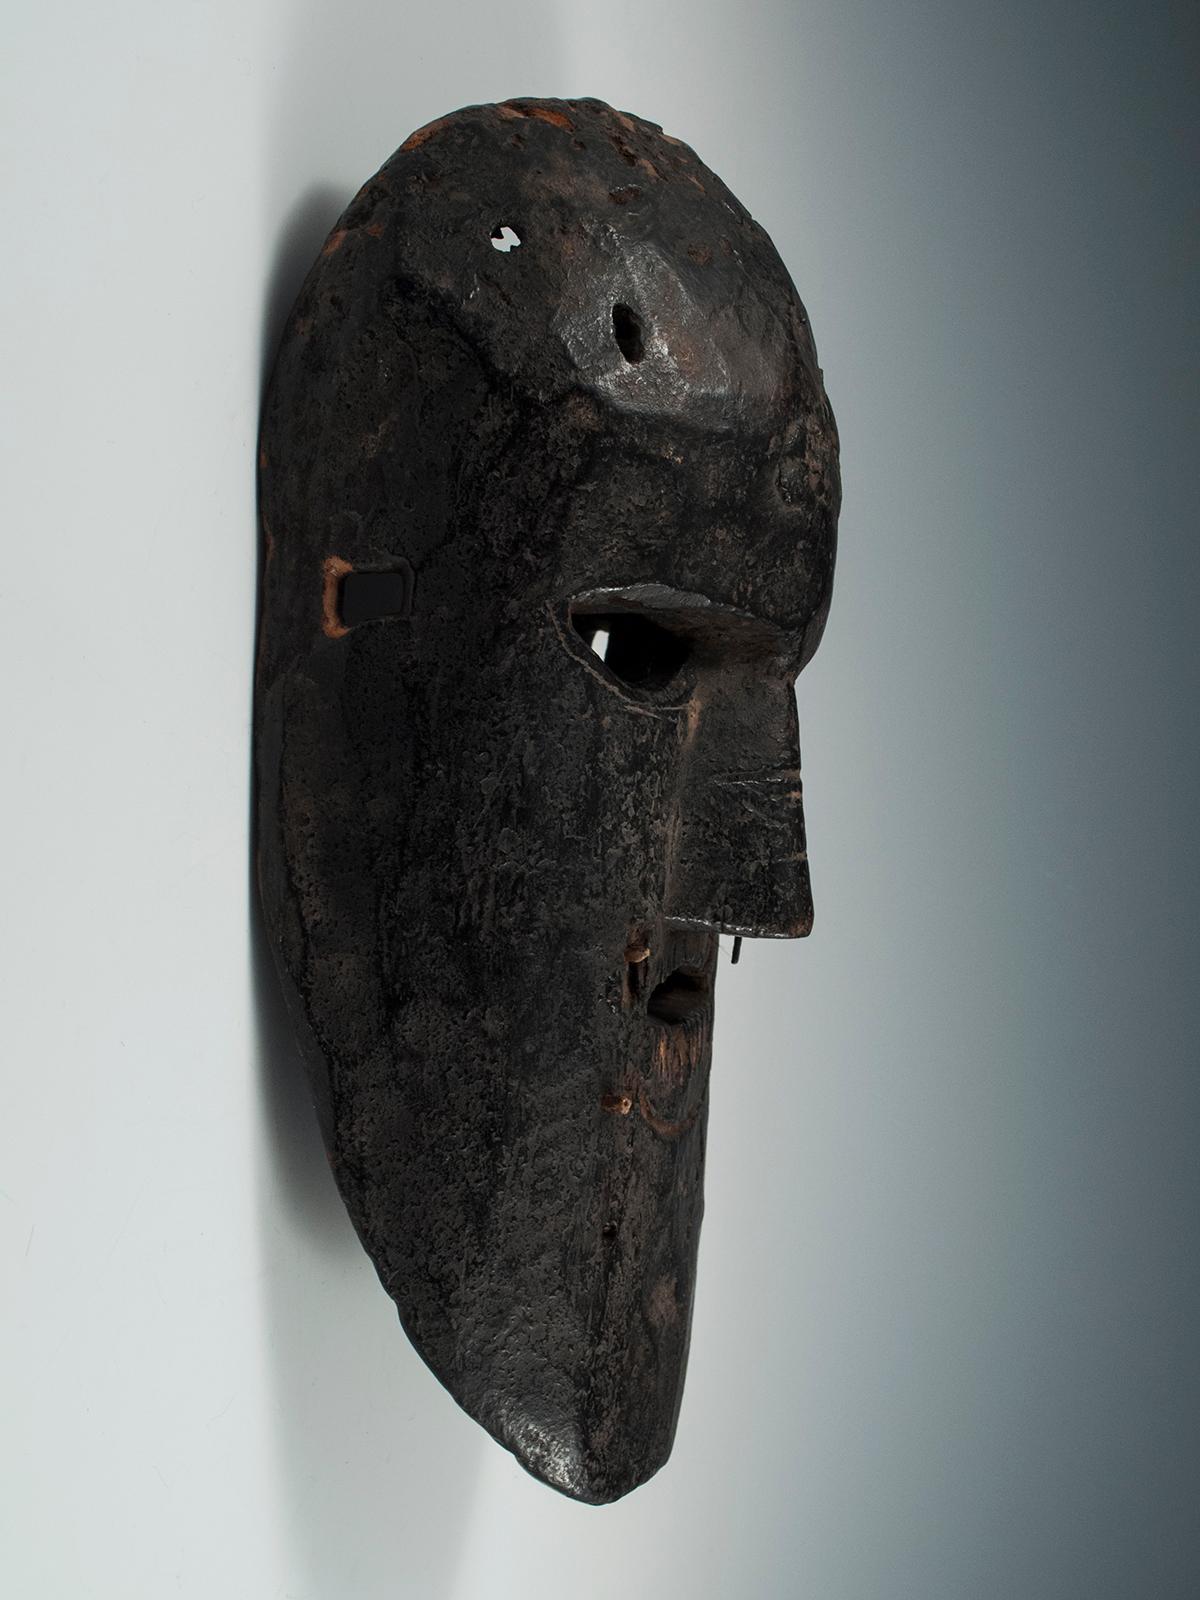 Early to mid-20th century Tribal mask, Middle Hills, Nepal
A stern brow and a multitude of teeth give this pared down Middle Hills mask a powerful presence. The yak hair that would have created beard and mustache is long gone, but the magical